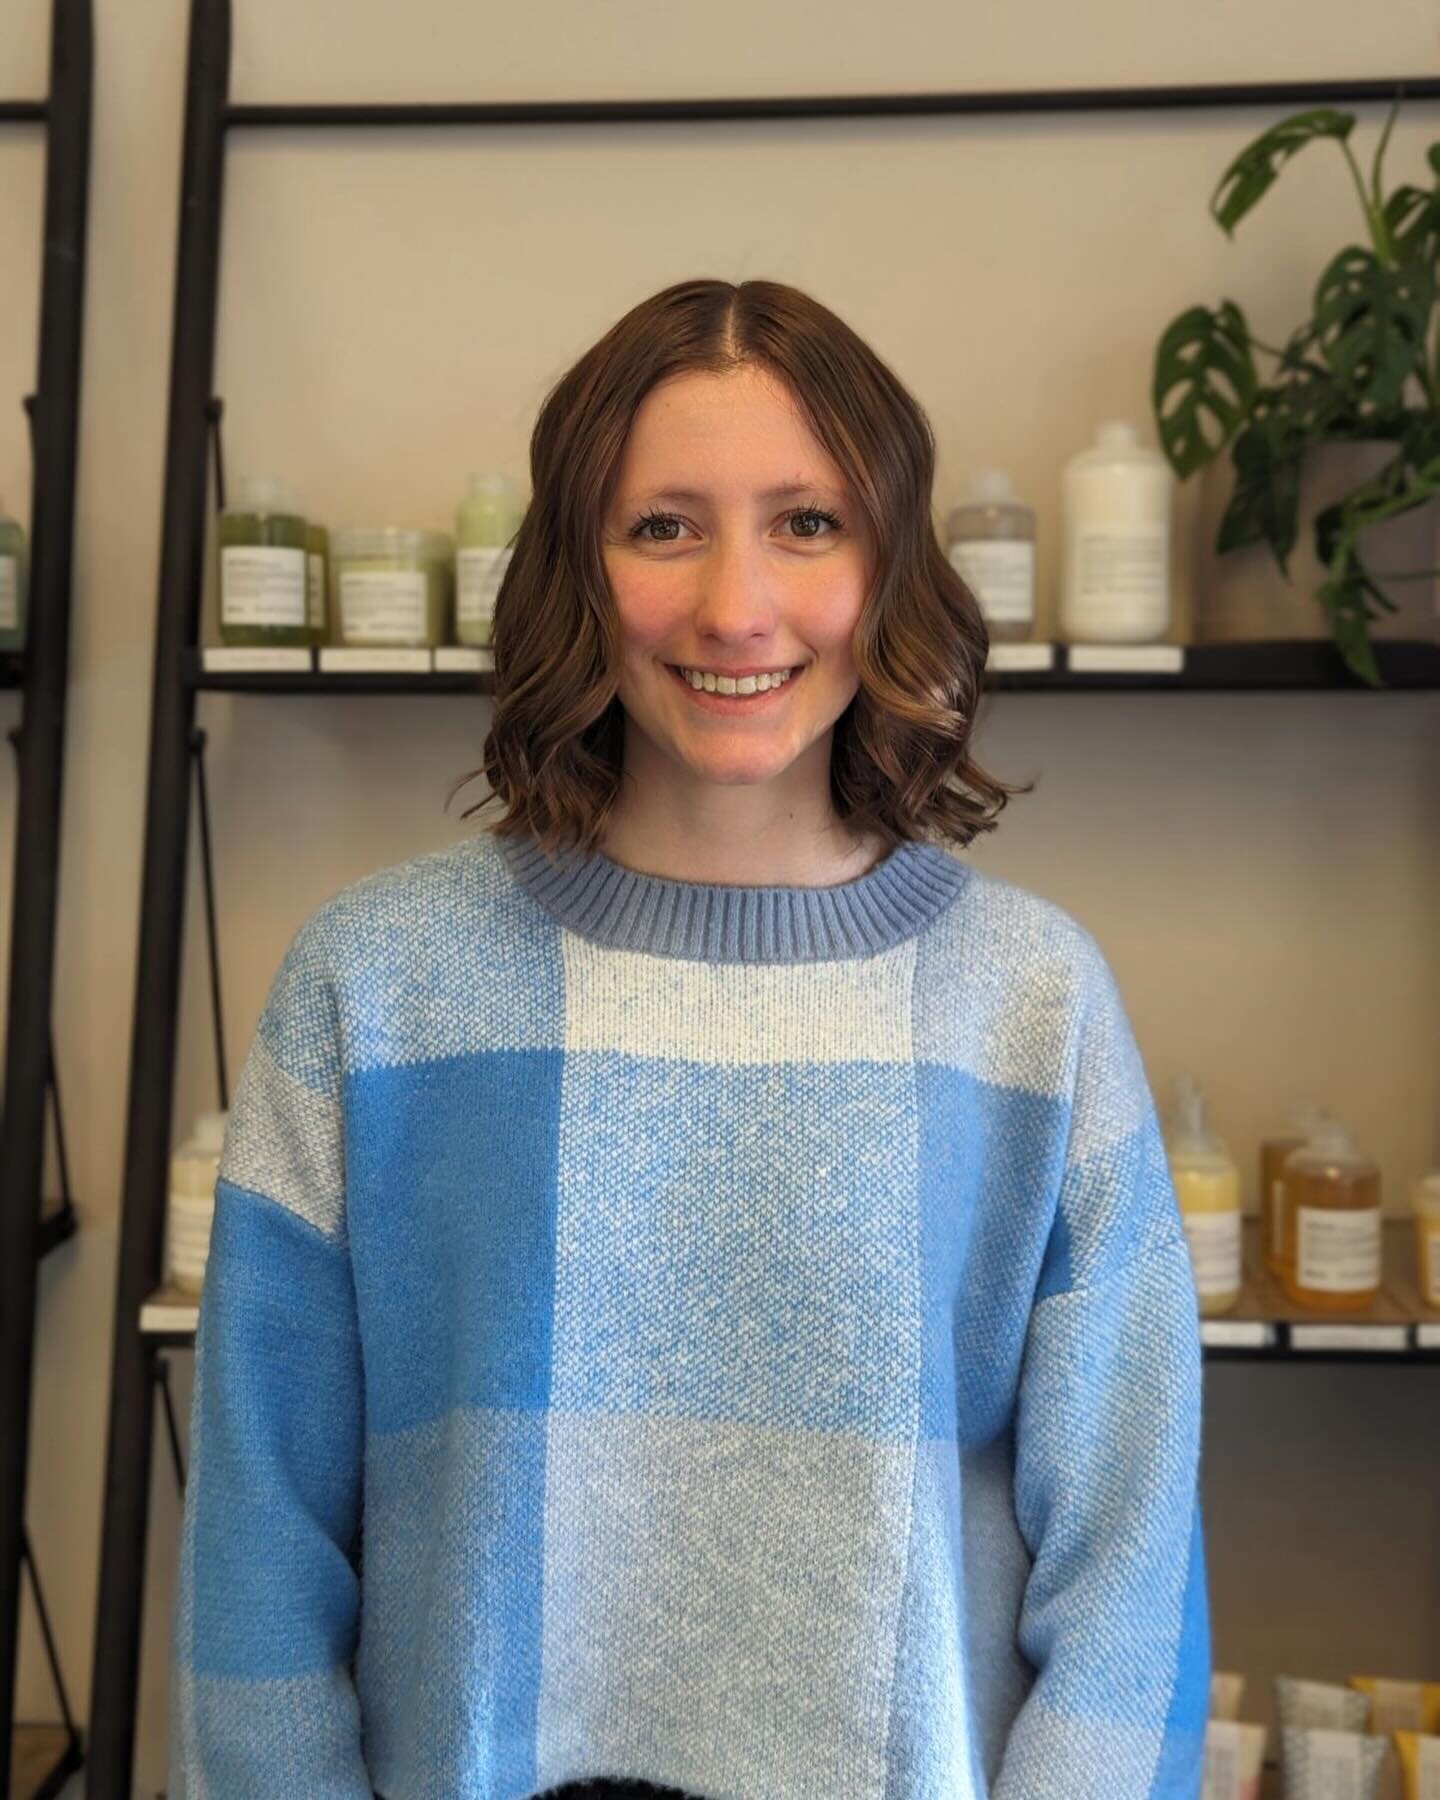 Maylin has been hard at work to complete our apprenticeship program since graduating from cosmetology school in 2023. We are excited to celebrate a soft opening of her book as she is now taking non-chemical services. That includes anything from facia